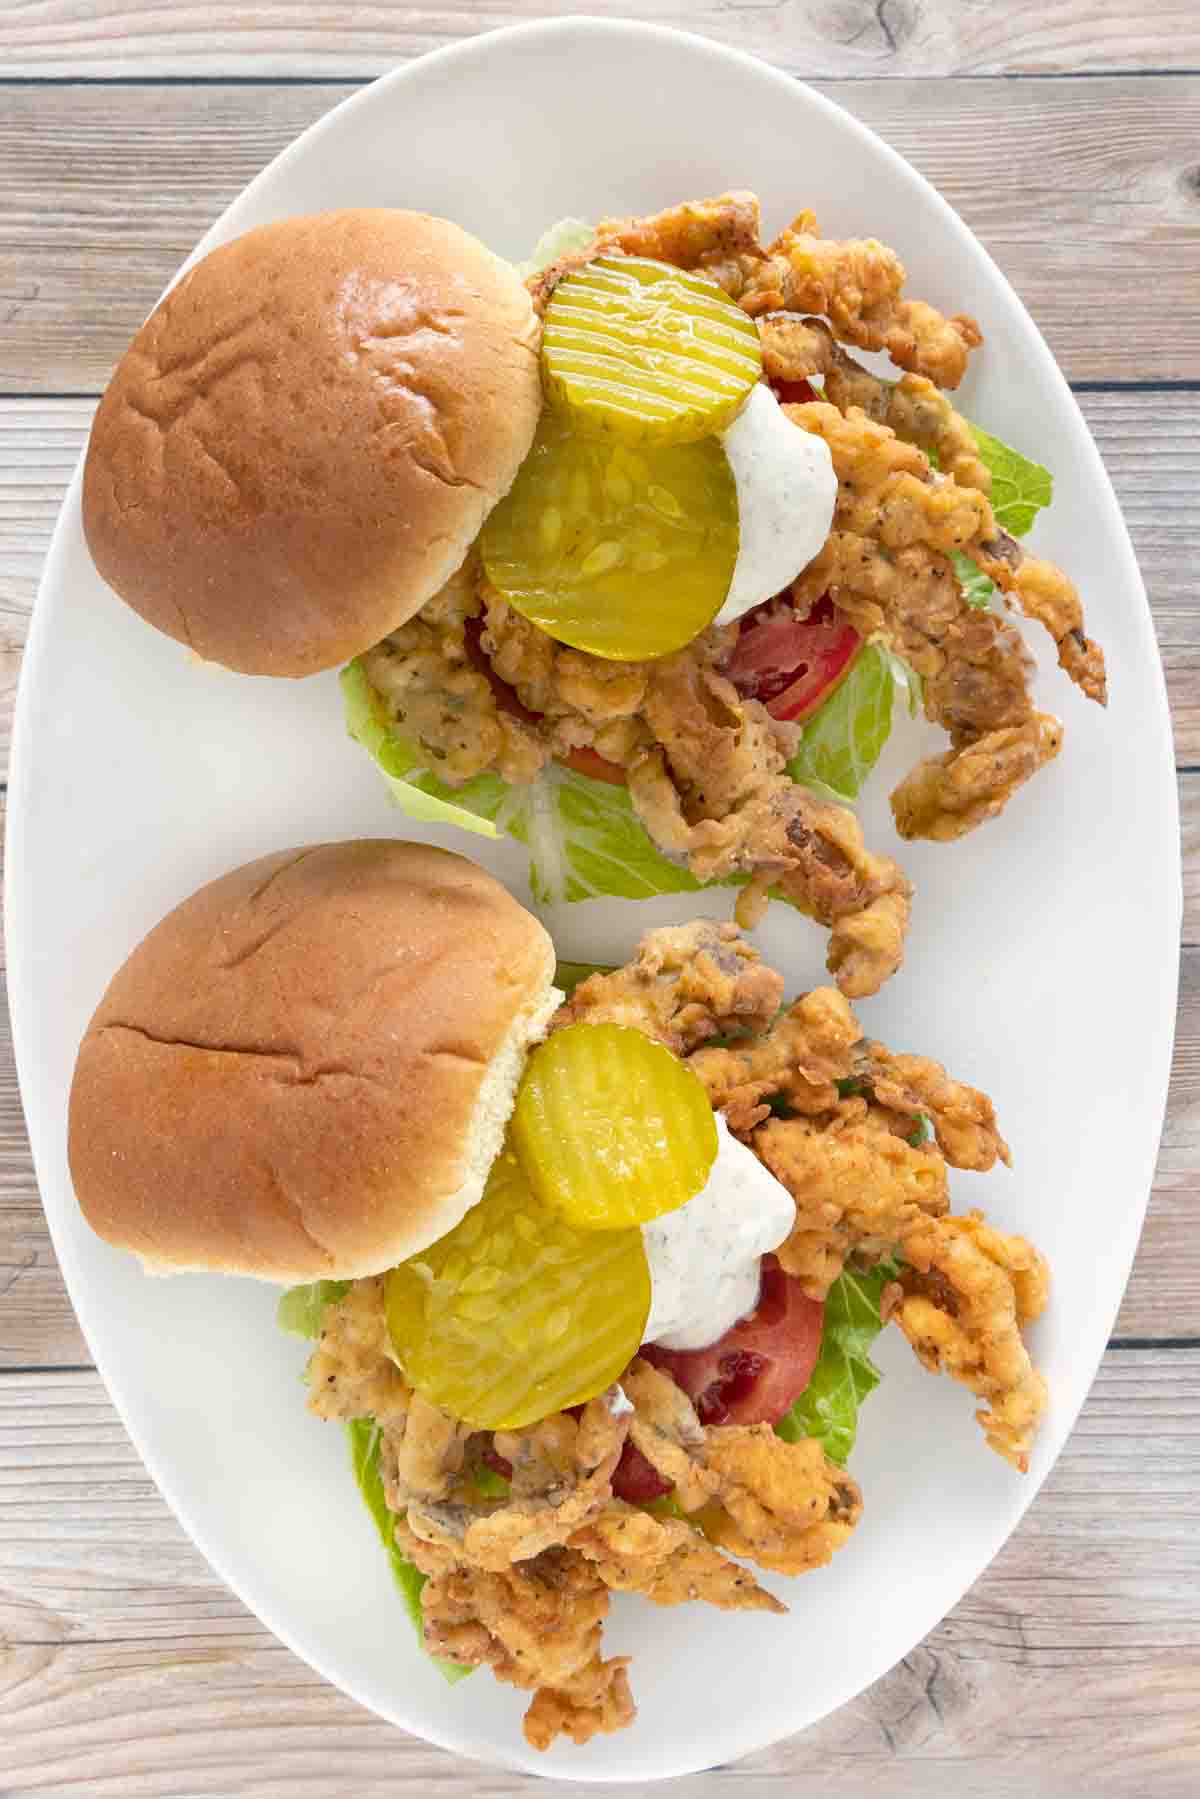 soft shell crab sandwiches with lettuce, tomato, tartar sauce and pickle chips on a white plate.